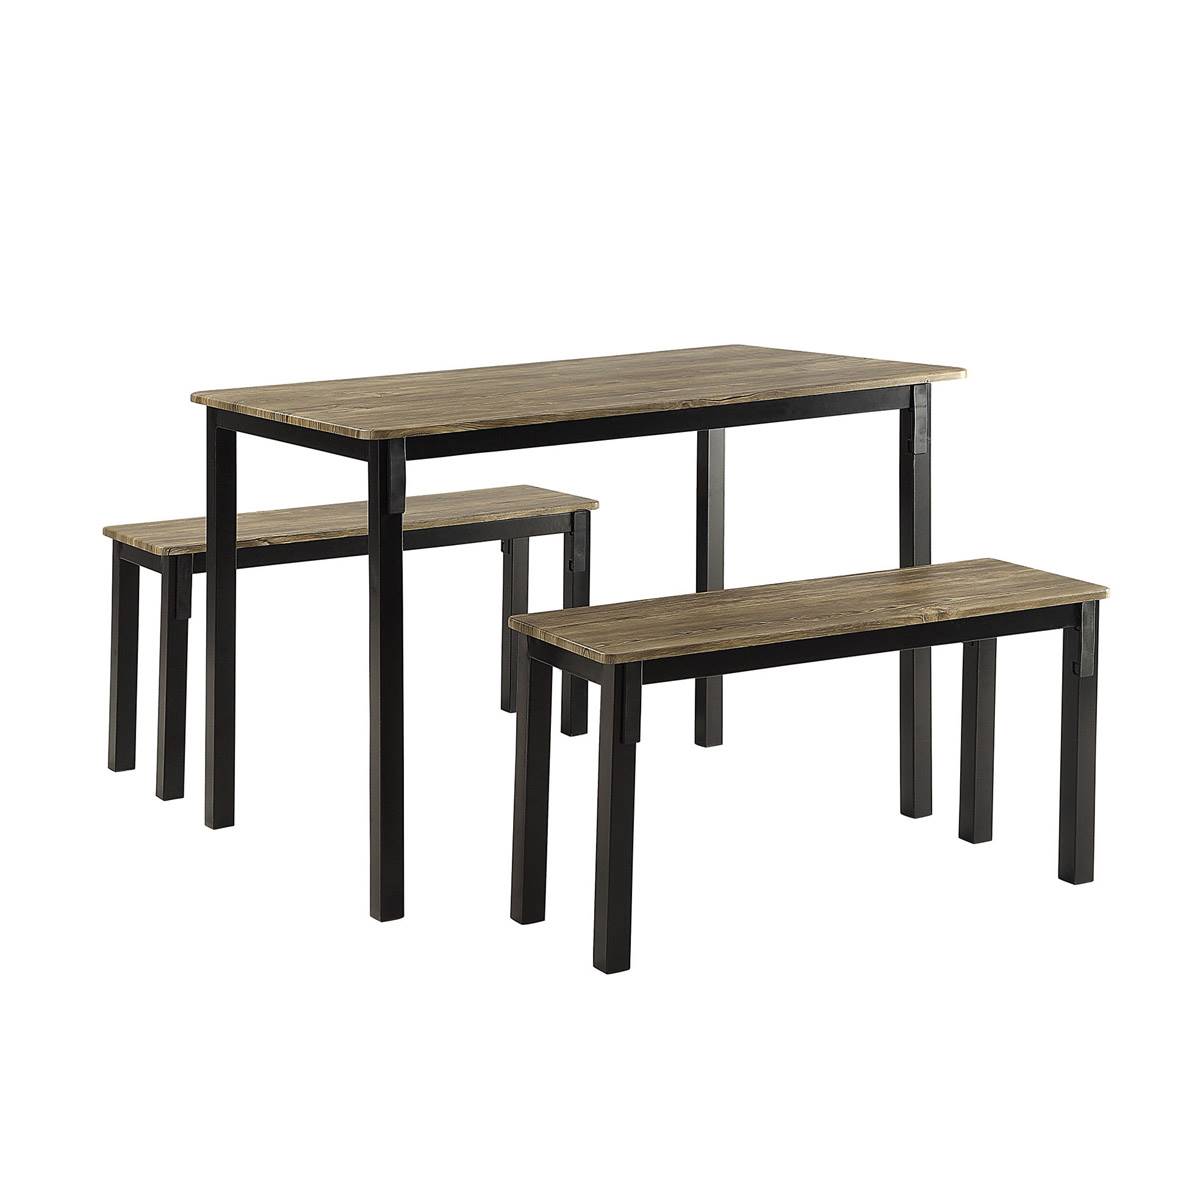 4D Concepts Toolless Boltzero Dining Table W/ 2 Benches